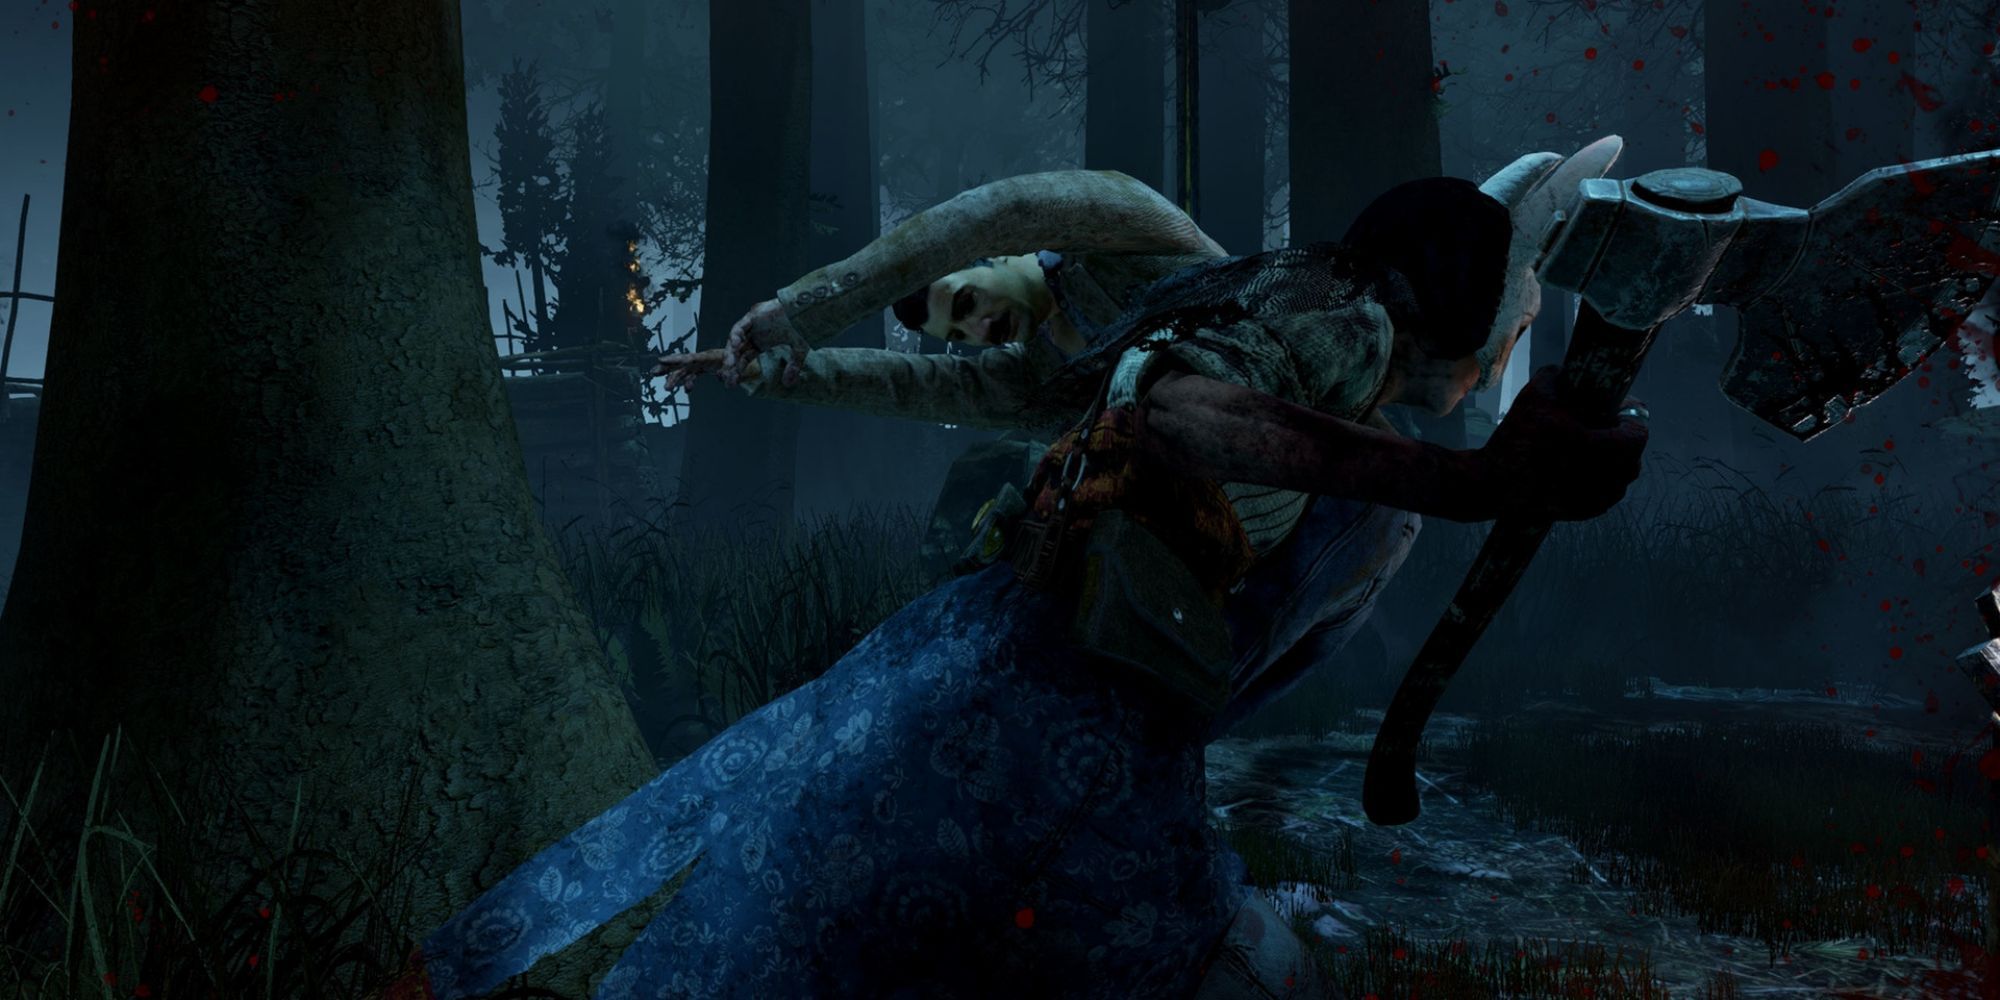 Huntress charging in Dead by Daylight